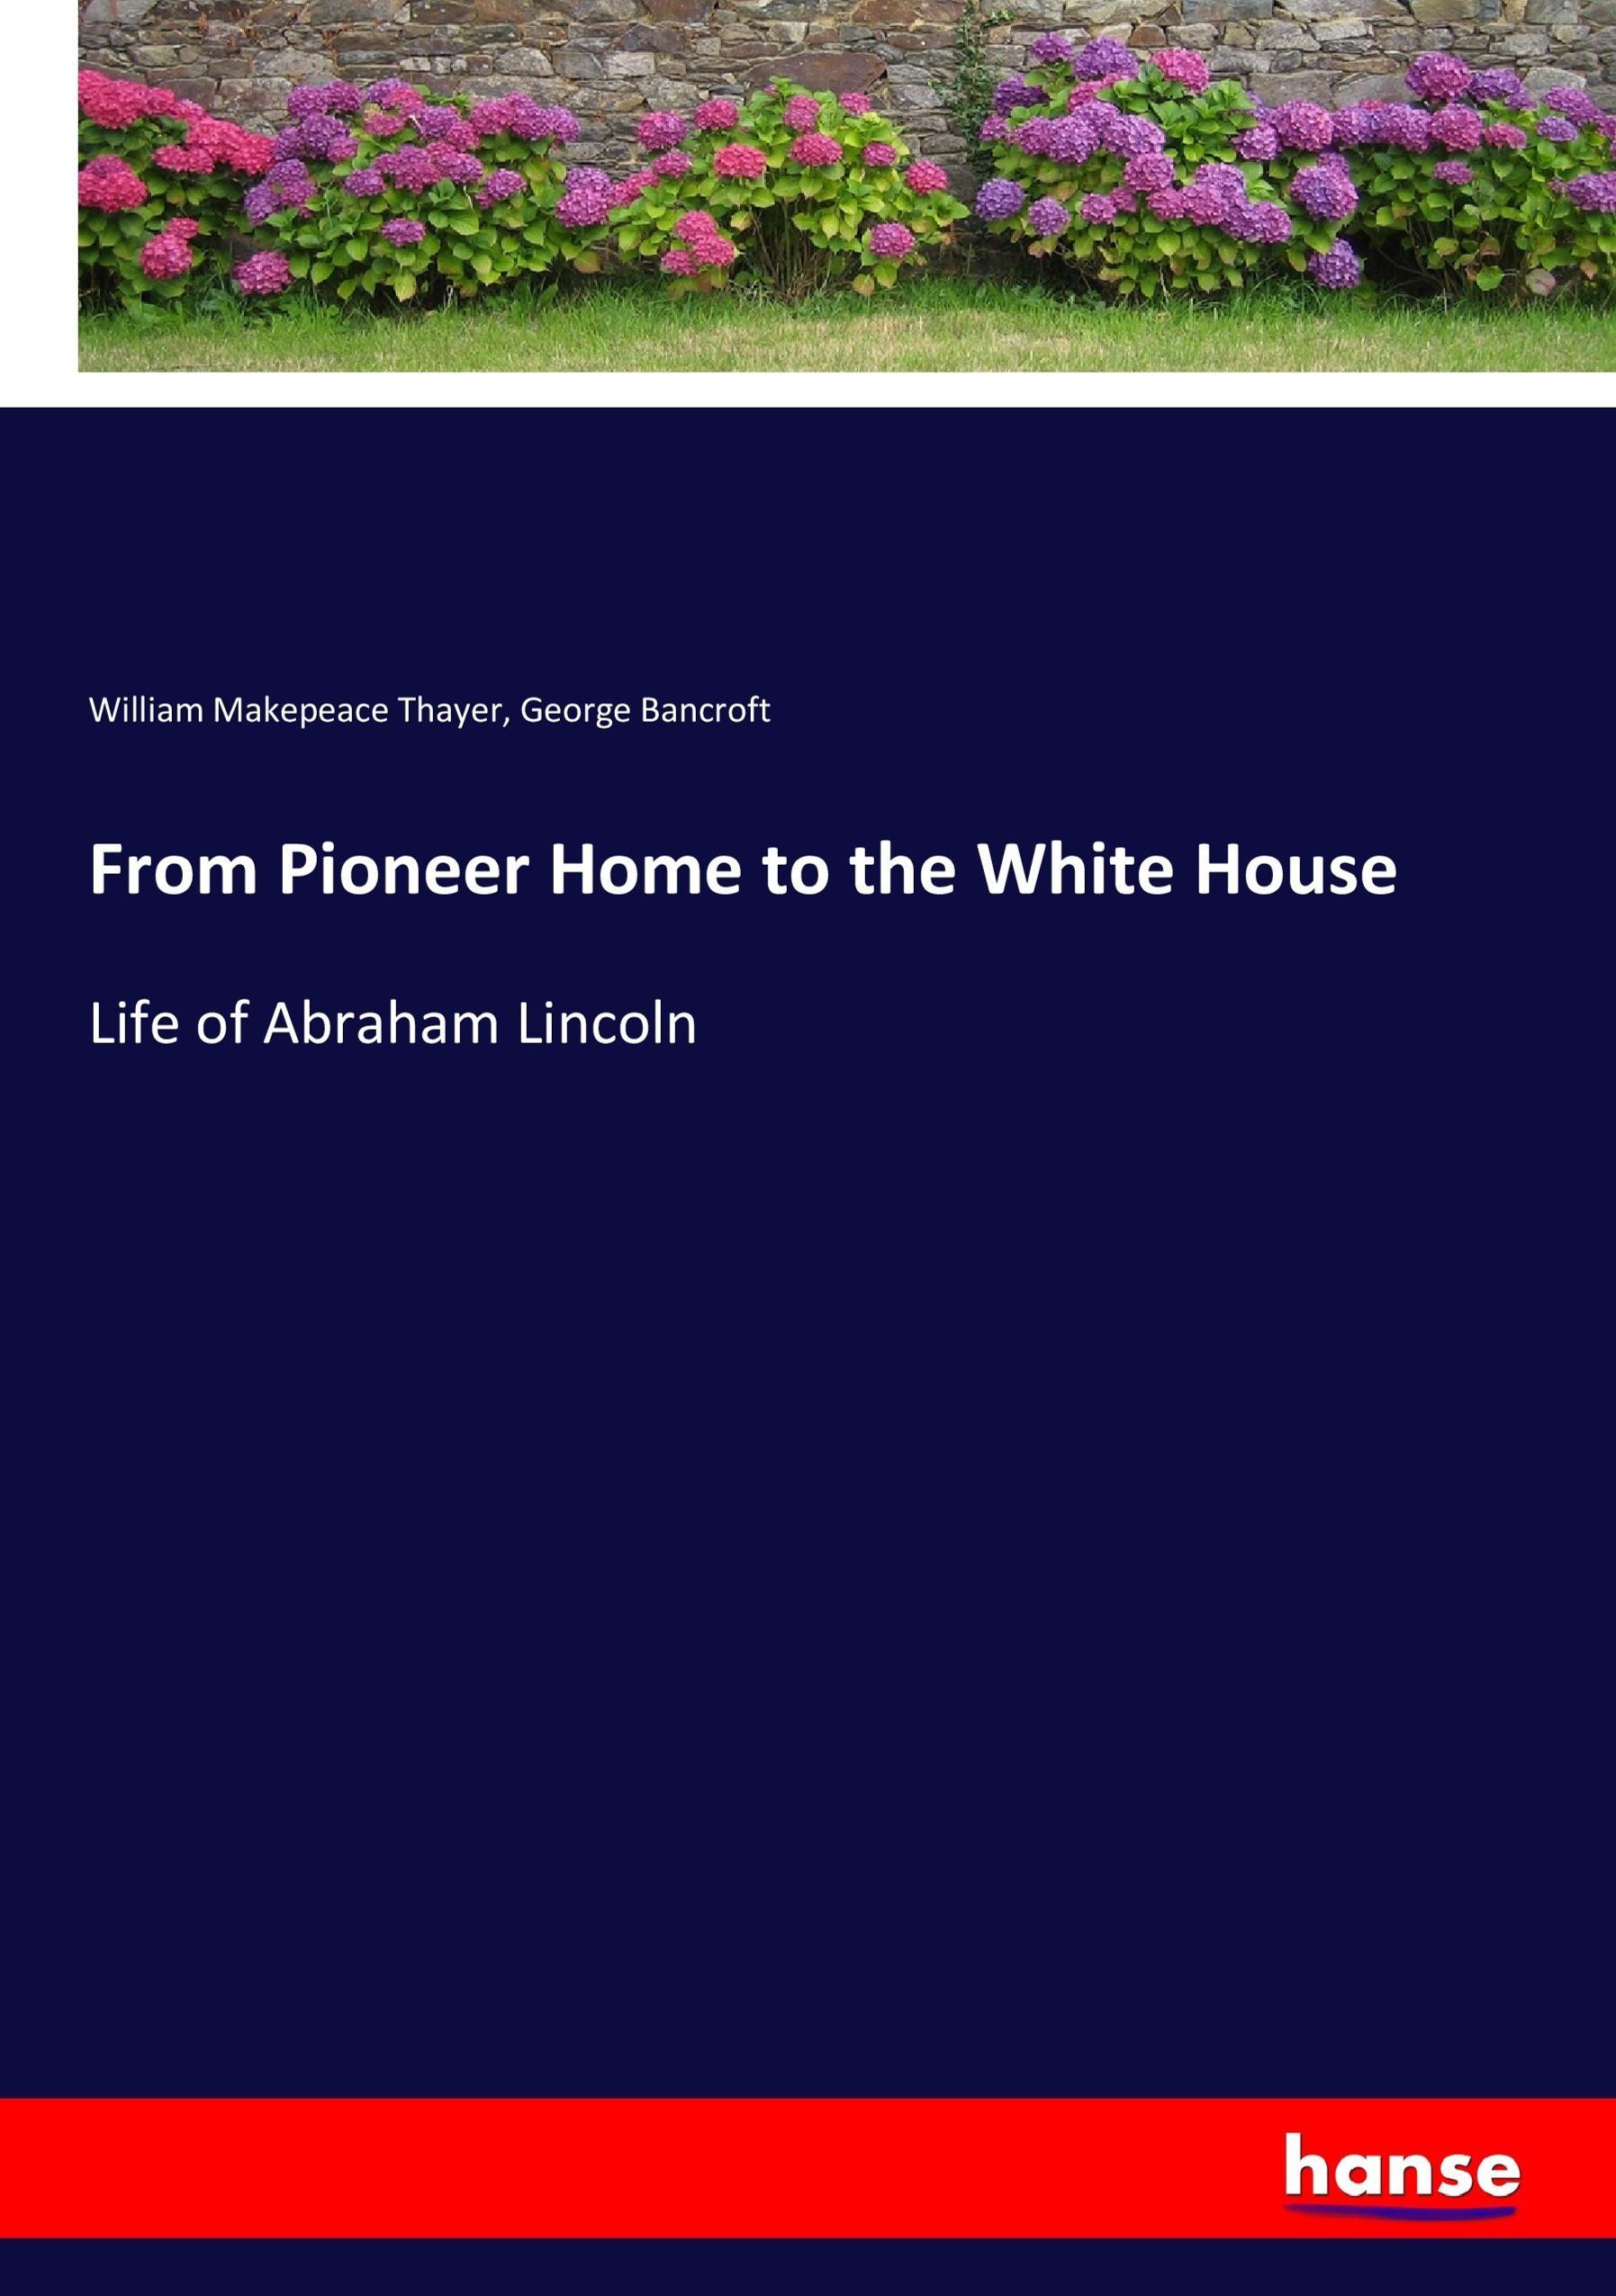 From Pioneer Home to the White House - Thayer, William Makepeace Bancroft, George